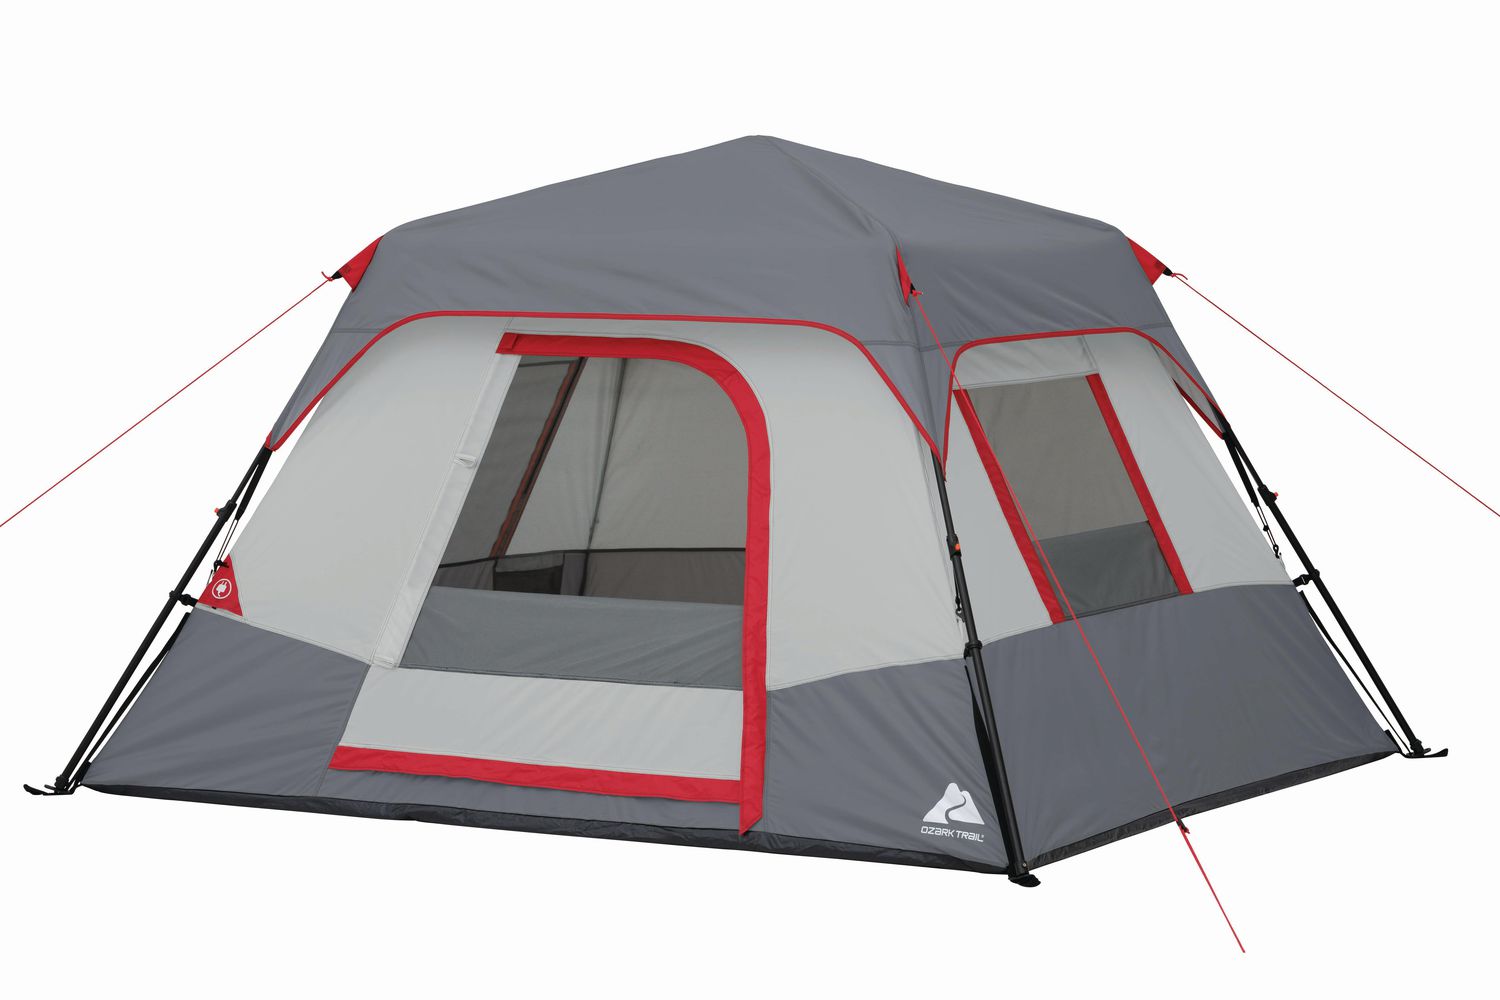 Up To 67% Off On 6-Person Instant Tent Groupon Goods | lupon.gov.ph